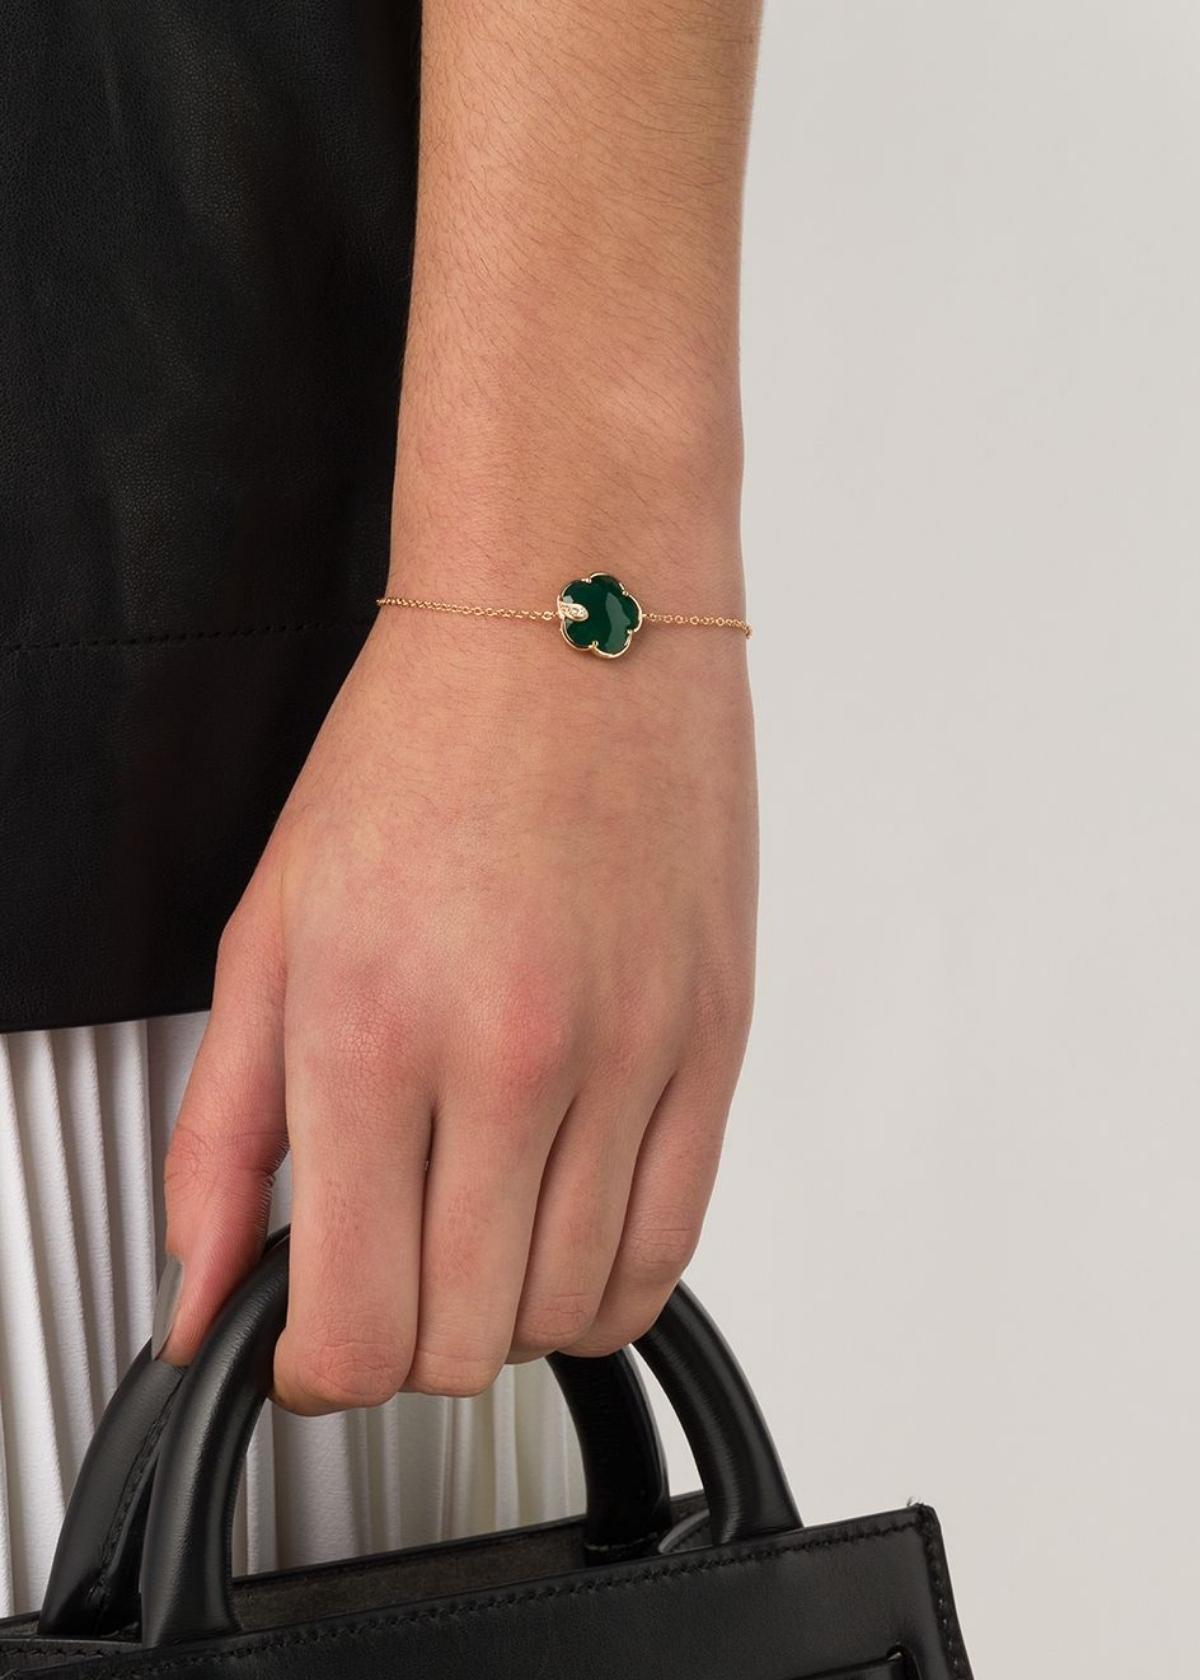 Pasquale Bruni
18kt rose gold Petit Joli agate and diamond bracelet
Dreaming of spring? Be transported to gardens in full bloom with this beautiful 18kt rose gold, green agate and white and champagne diamond flower Petit Joli bracelet from Pasquale